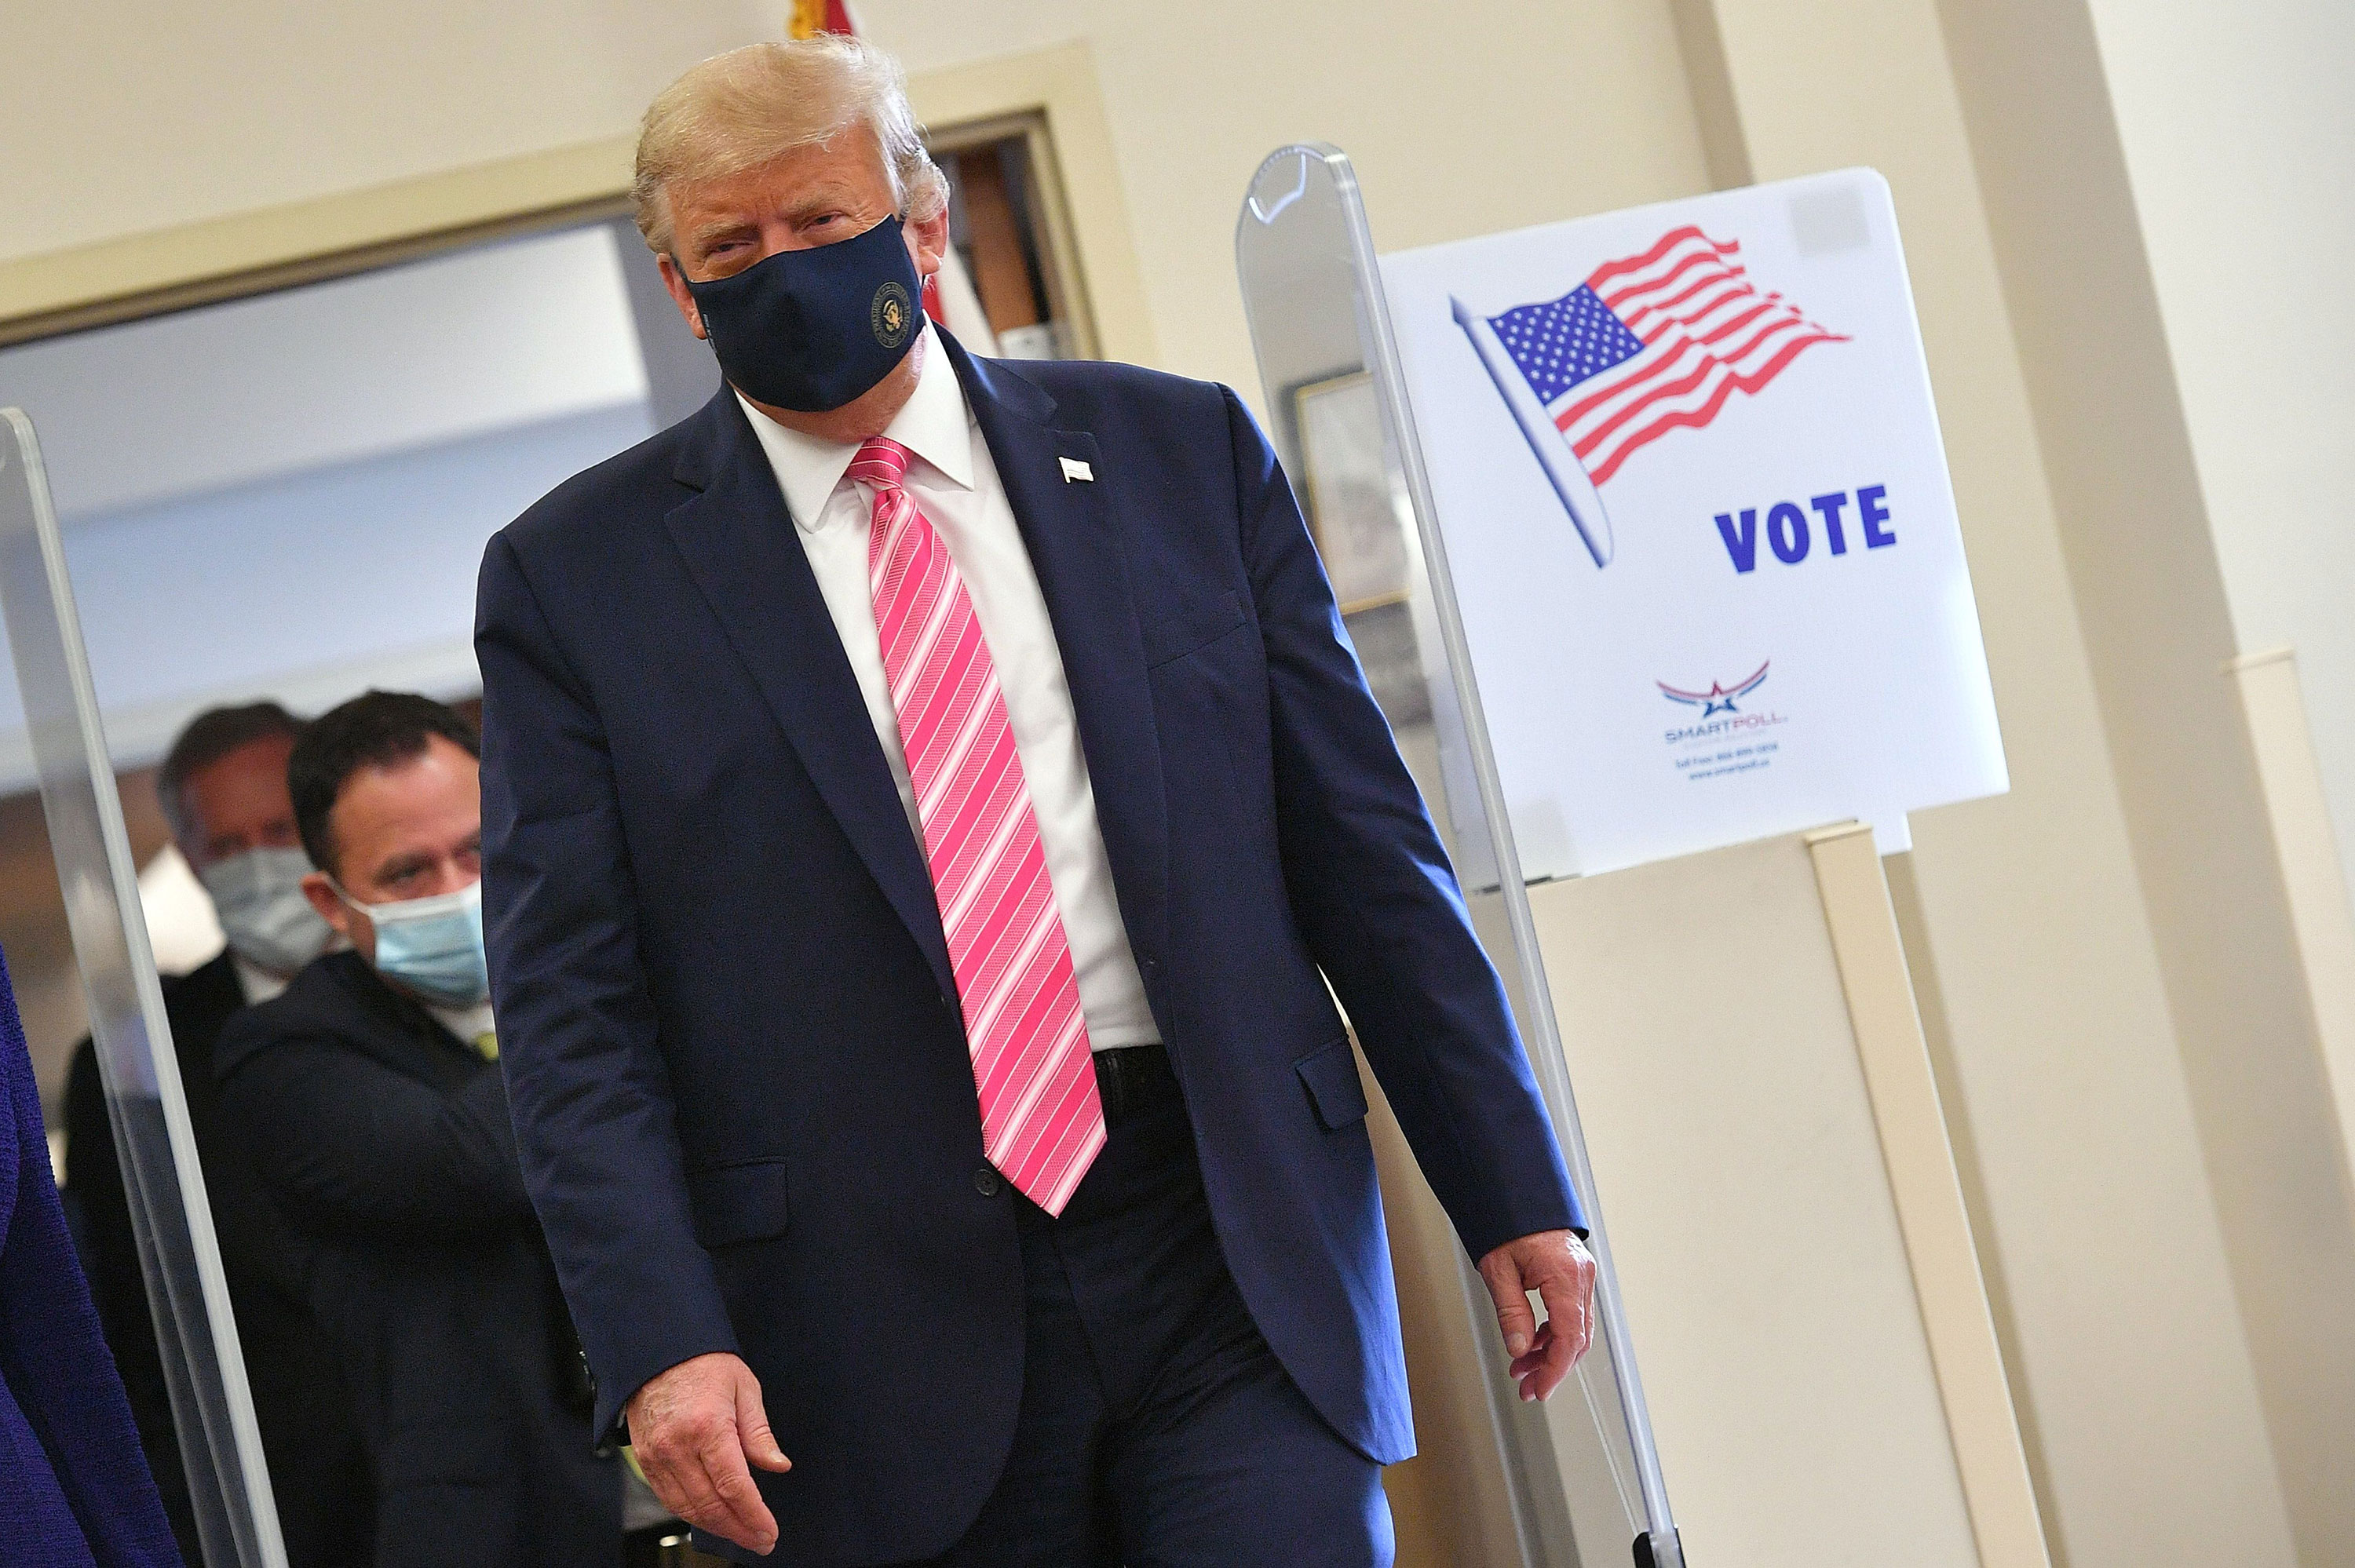 President Donald Trump leaves after casting his ballot at the Palm Beach County Public Library in West Palm Beach, Florida, on October 24.